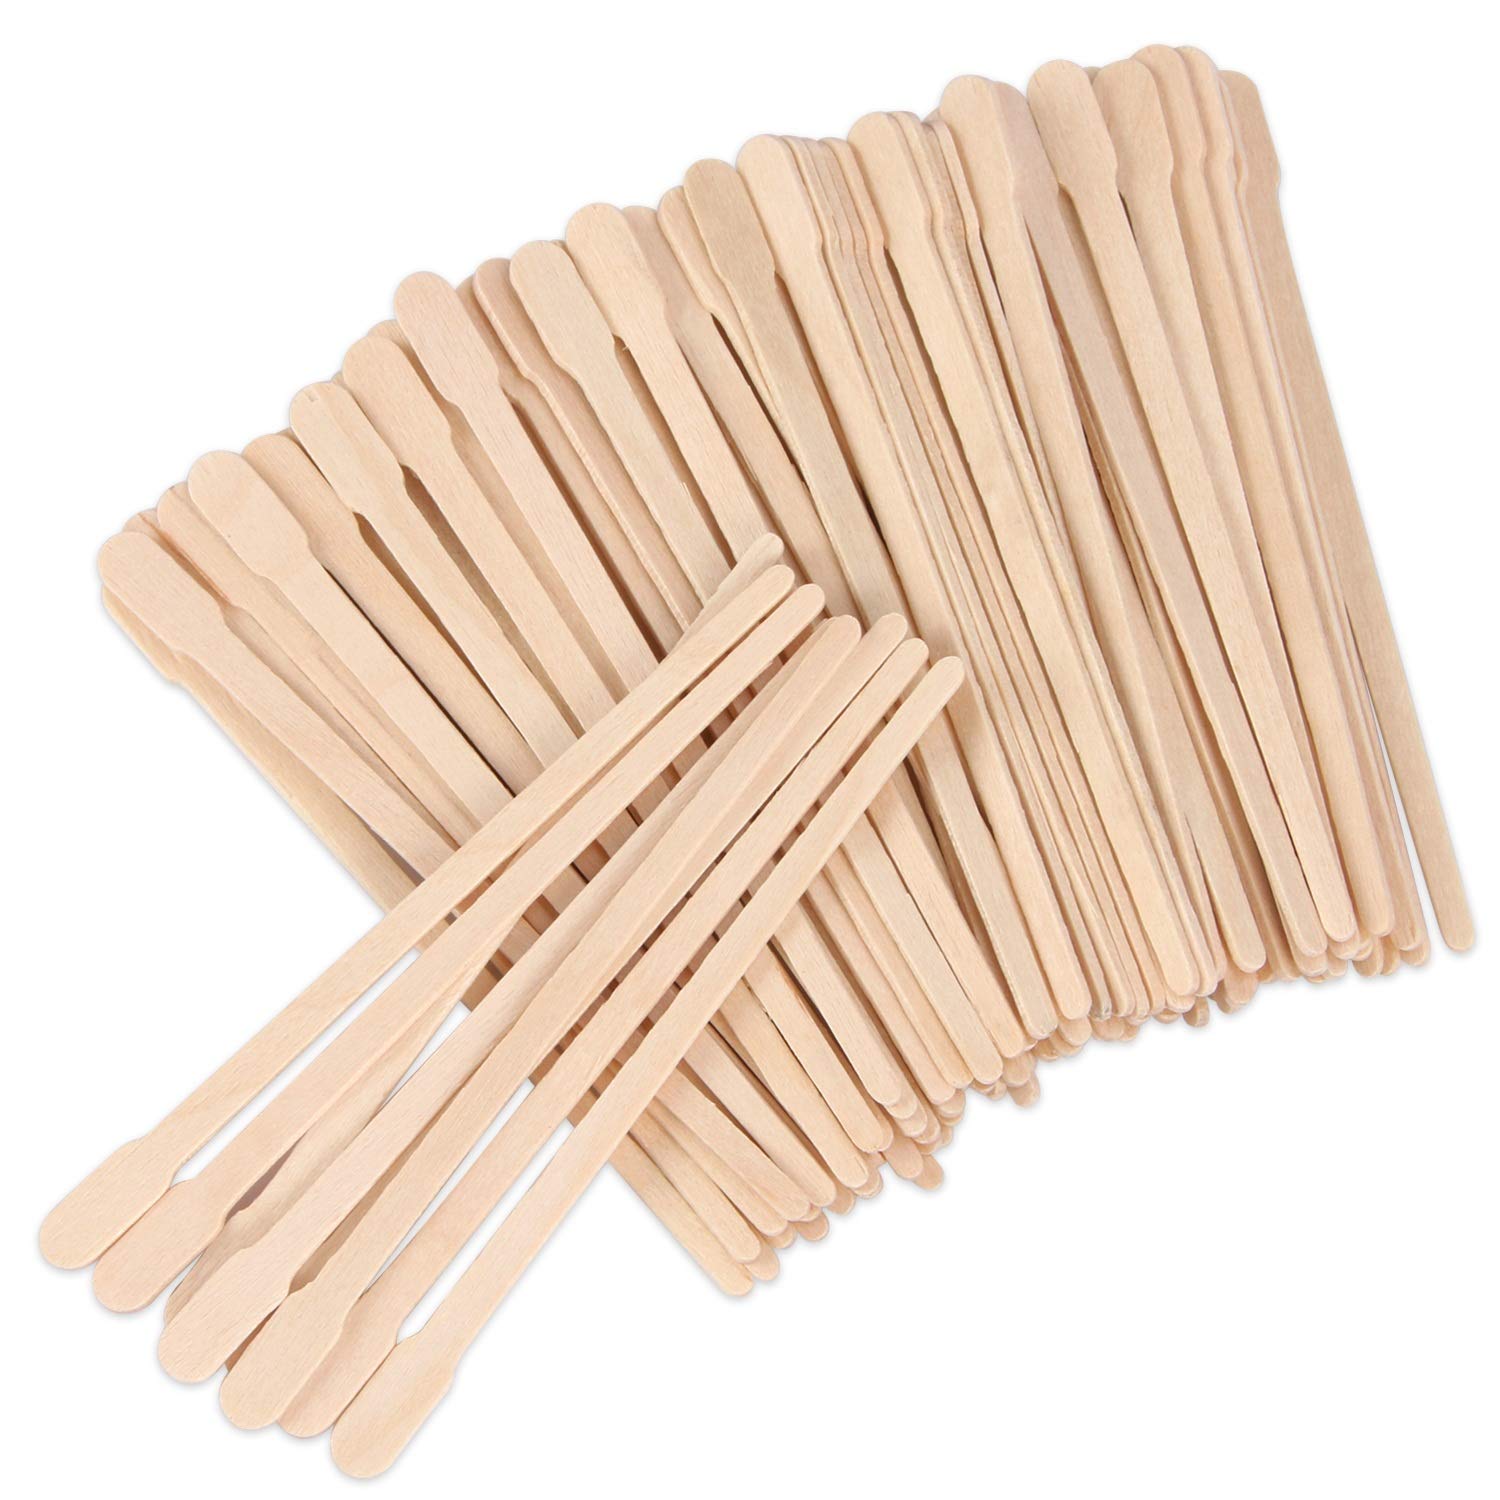 200 Pcs Eyebrow Wax Sticks Wax Applicator, Wood Wax Spatulas for Face Small  Hair Removal Sticks or Wood Craft Sticks (With Handle)